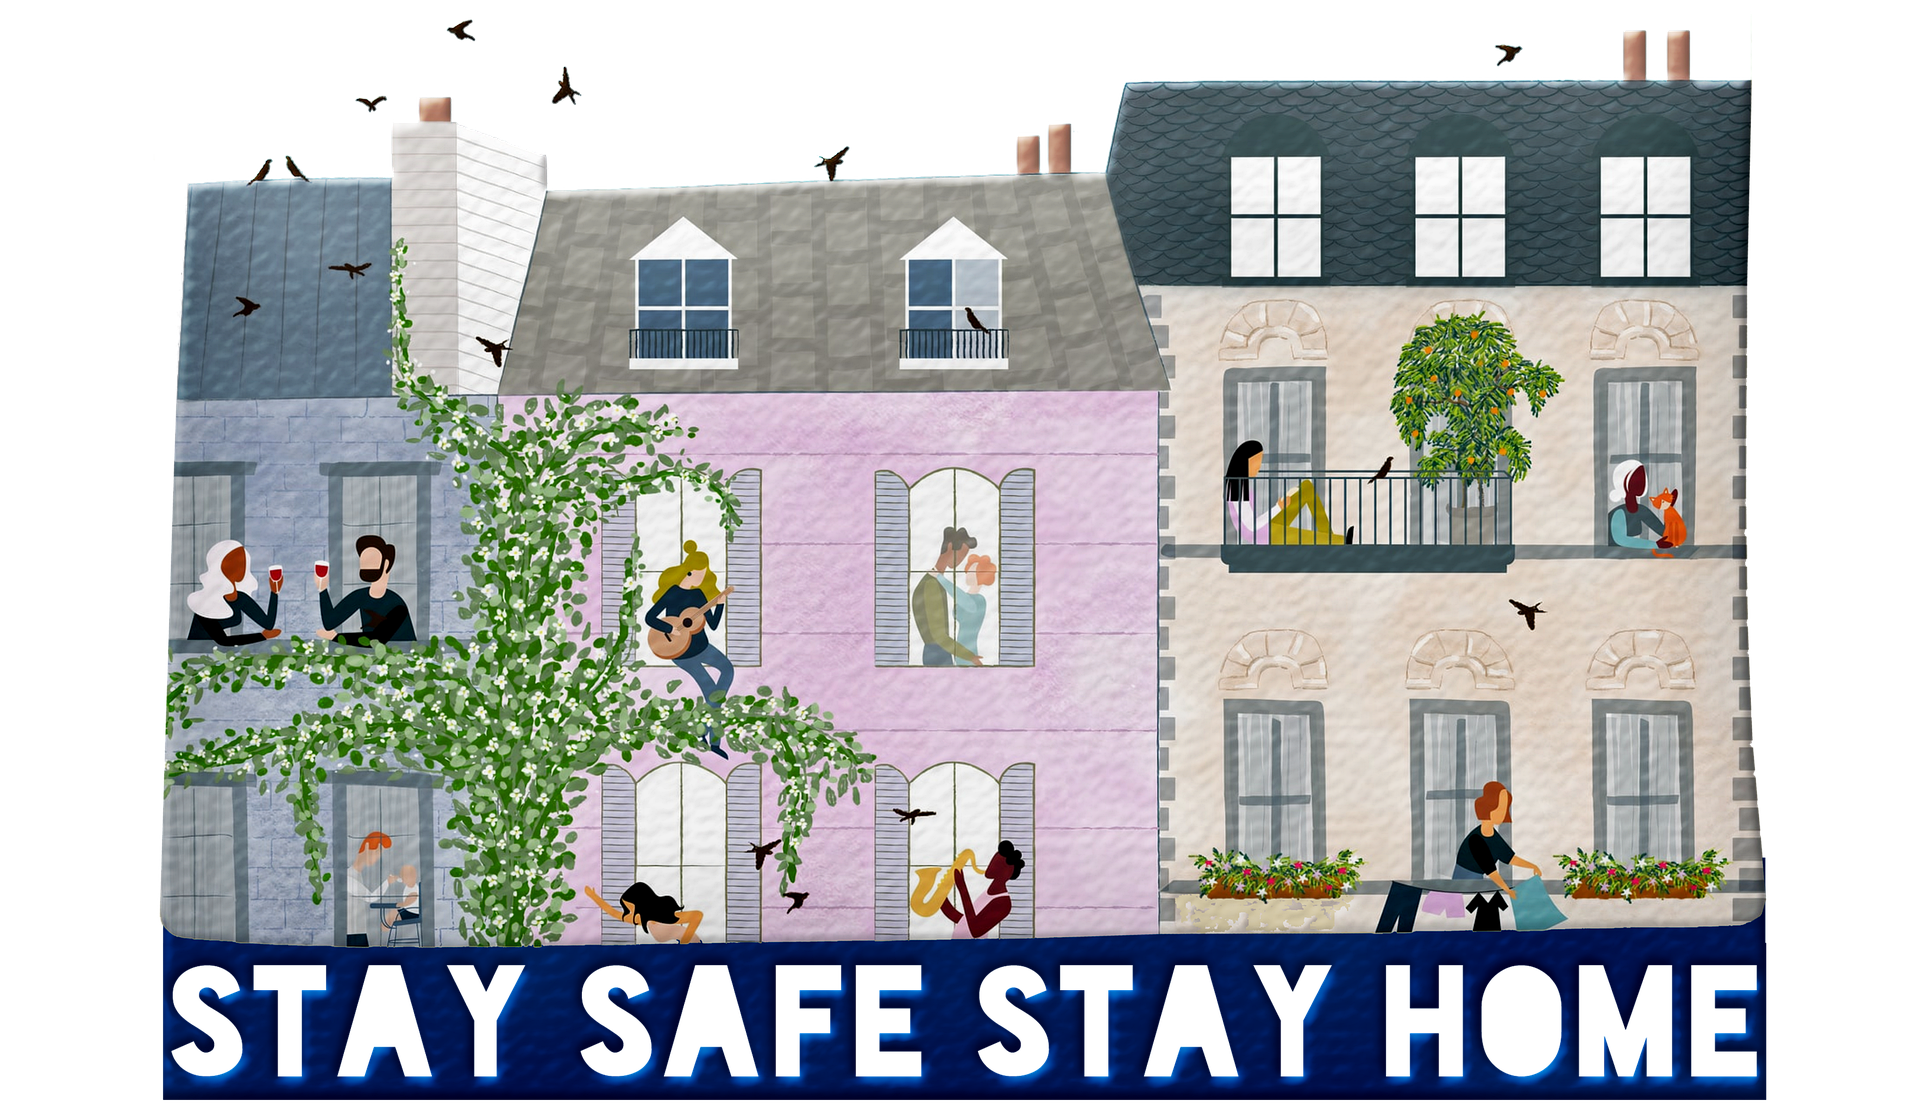 stay at home to stay safe